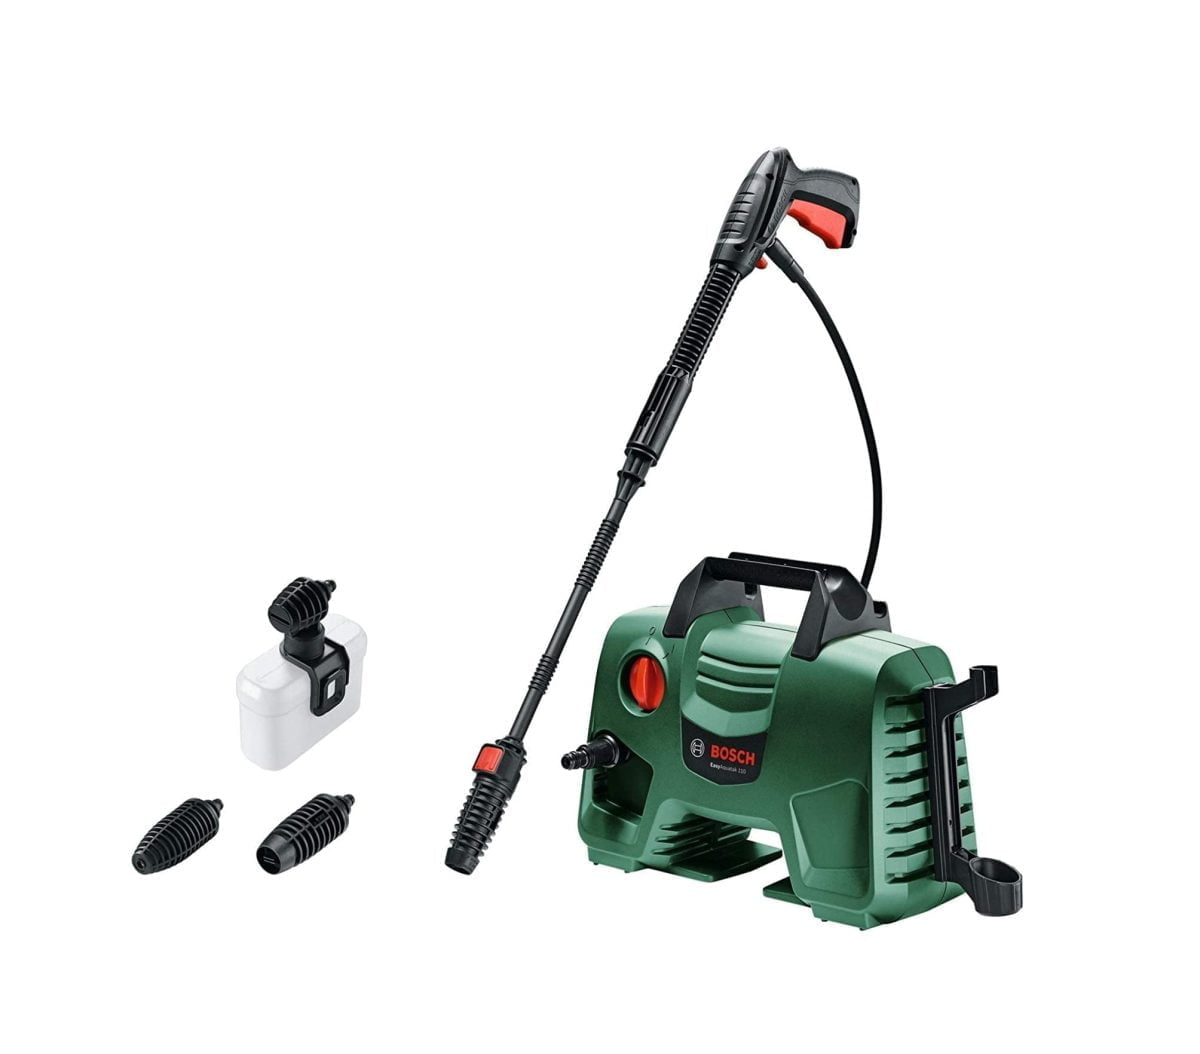 71E0Odjw4Vl. Ac Sl1500 Bosch &Lt;H1 Class=&Quot;Product-Title&Quot;&Gt;Bosch Easyaquatak 100 Long Lance Pressure Washer (1200 W) 100 Bar&Lt;/H1&Gt; &Lt;Div Class=&Quot;Col-Sm-6 Col-Md-12&Quot;&Gt; &Lt;Div Class=&Quot;O-Pthg-Productstage__Product-Summary H6&Quot;&Gt; &Lt;Div Class=&Quot;O-Pthg-Productstage__Product-Summary H6&Quot;&Gt;Compact And Quick For Effortless Cleaning Performance&Lt;/Div&Gt; &Lt;Ul Class=&Quot;A-List A-List--Unordered&Quot;&Gt; &Lt;Li Class=&Quot;A-List__Item&Quot;&Gt; &Lt;Div Class=&Quot;A-Text-Richtext&Quot;&Gt;Compact Design Allows Easy Maneuverability For Quick Cleaning Job&Lt;/Div&Gt;&Lt;/Li&Gt; &Lt;Li Class=&Quot;A-List__Item&Quot;&Gt; &Lt;Div Class=&Quot;A-Text-Richtext&Quot;&Gt;Adjustable Nozzle – From A Forceful Jet To Gentle Rinsing&Lt;/Div&Gt;&Lt;/Li&Gt; &Lt;Li Class=&Quot;A-List__Item&Quot;&Gt; &Lt;Div Class=&Quot;A-Text-Richtext&Quot;&Gt;Push-Fit Connections For Ultimate Convenience&Lt;/Div&Gt;&Lt;/Li&Gt; &Lt;Li Class=&Quot;A-List__Item&Quot;&Gt; &Lt;Div Class=&Quot;A-Text-Richtext&Quot;&Gt;Easily Tackle Small-To-Medium-Sized Cleaning Tasks&Lt;/Div&Gt;&Lt;/Li&Gt; &Lt;/Ul&Gt; Model 00600 8A7 E71 Is &Lt;/Div&Gt; &Lt;/Div&Gt; Bosch Easyaquatak 100 Bosch Easyaquatak 100 Long Lance Pressure Washer (1200 W) 100 Bar